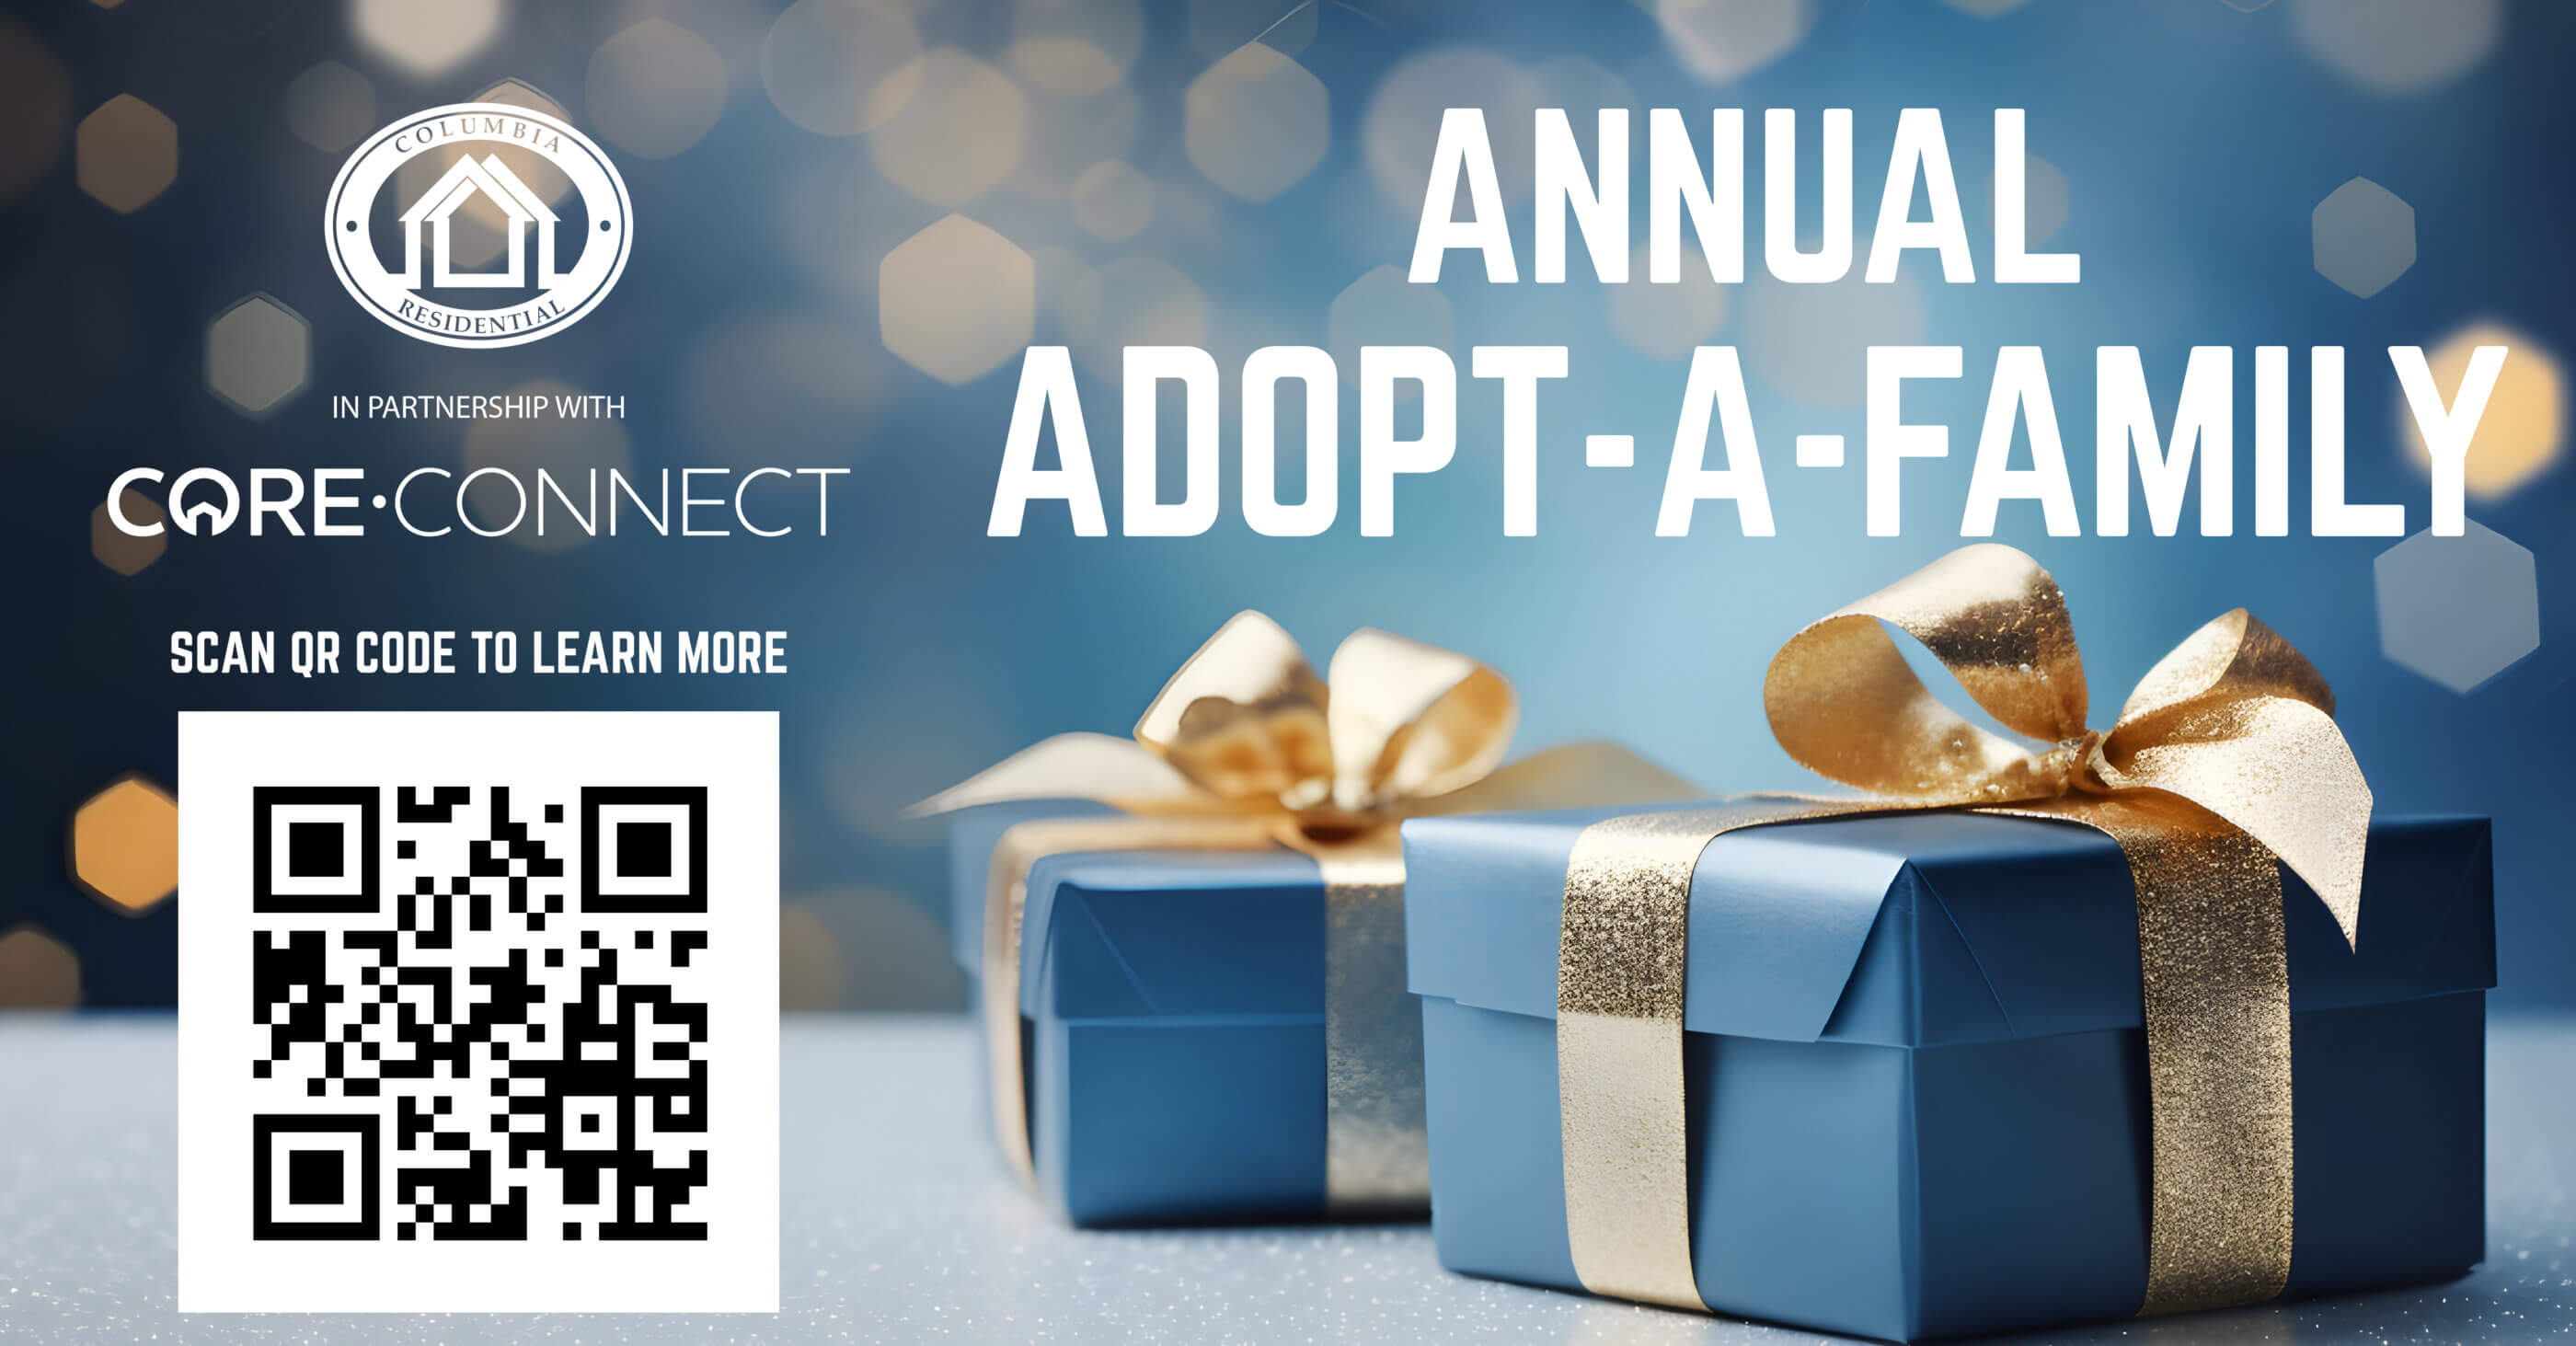 Columbia Residential, In Partnership With Core Connect, Inc., Presents the 4th Annual Adopt-A-Family Holiday Initiative. Donors Needed To Provide Joy and Hope For 100 Metro Atlanta Families.